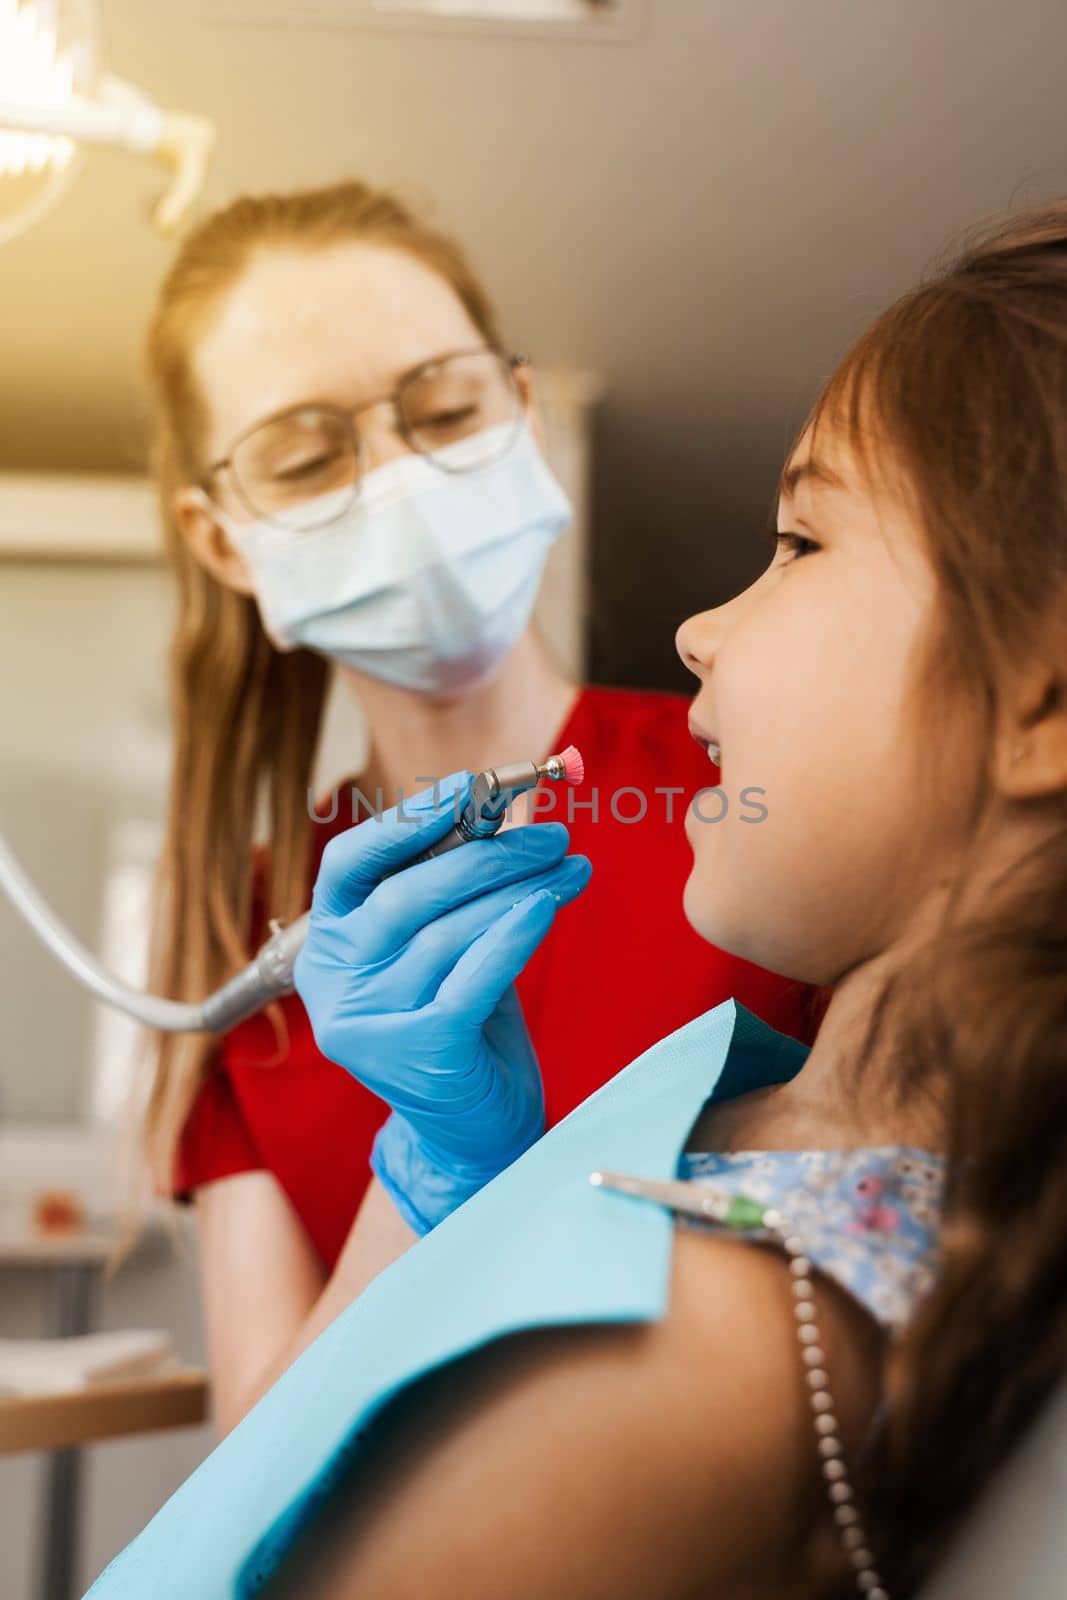 Professional teeth cleaning for child girl in dentistry. Professional hygiene for teeth of child. Pediatric dentist examines and consults kid patient in dentistry